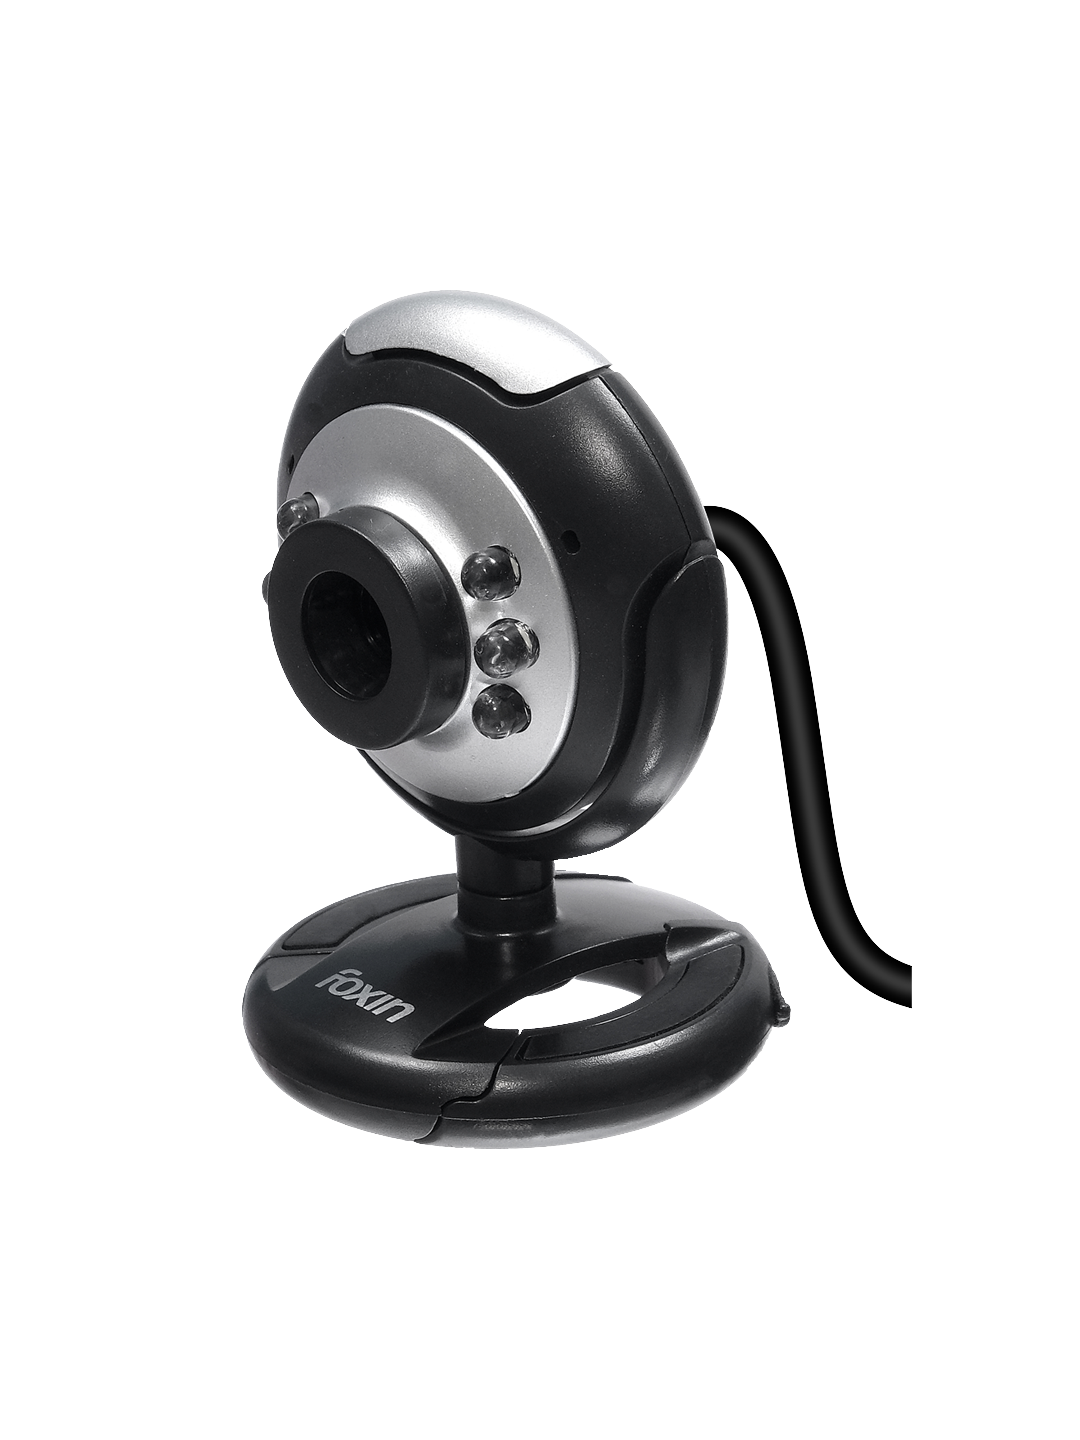 WEB VISION Web Camera with in-built mic